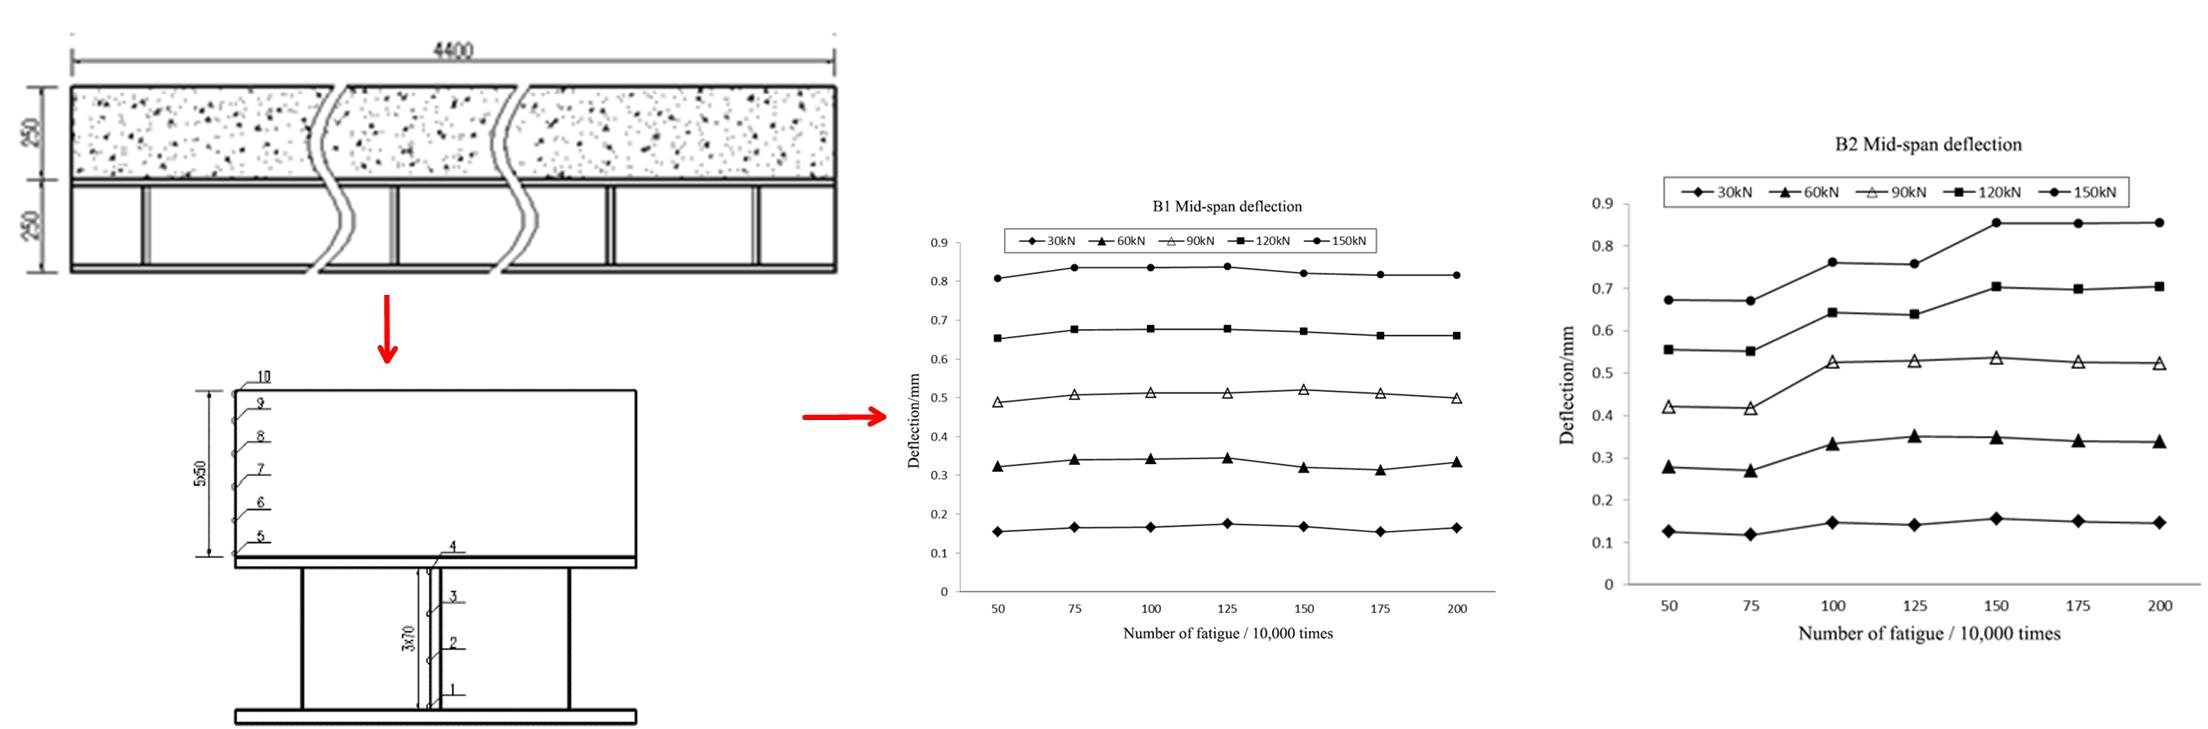 Fatigue test study of weathering steel-concrete composite beam under corrosive environment